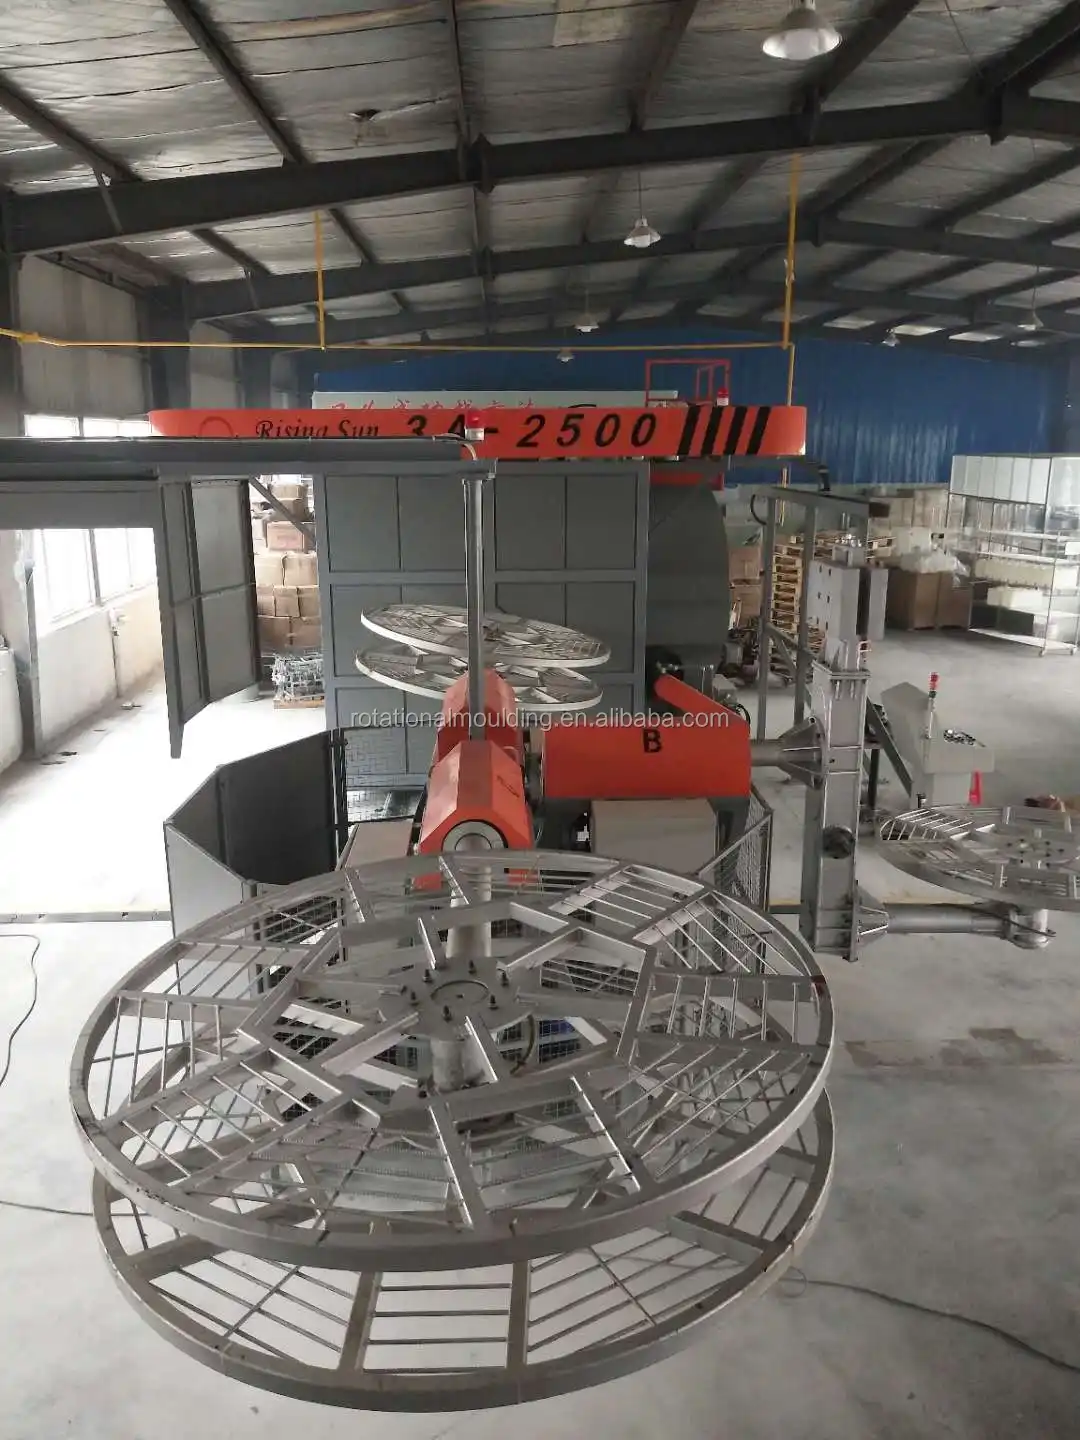 Rising Sun 3A-3500 carrousel rotomolding machine for floating and buoy in China